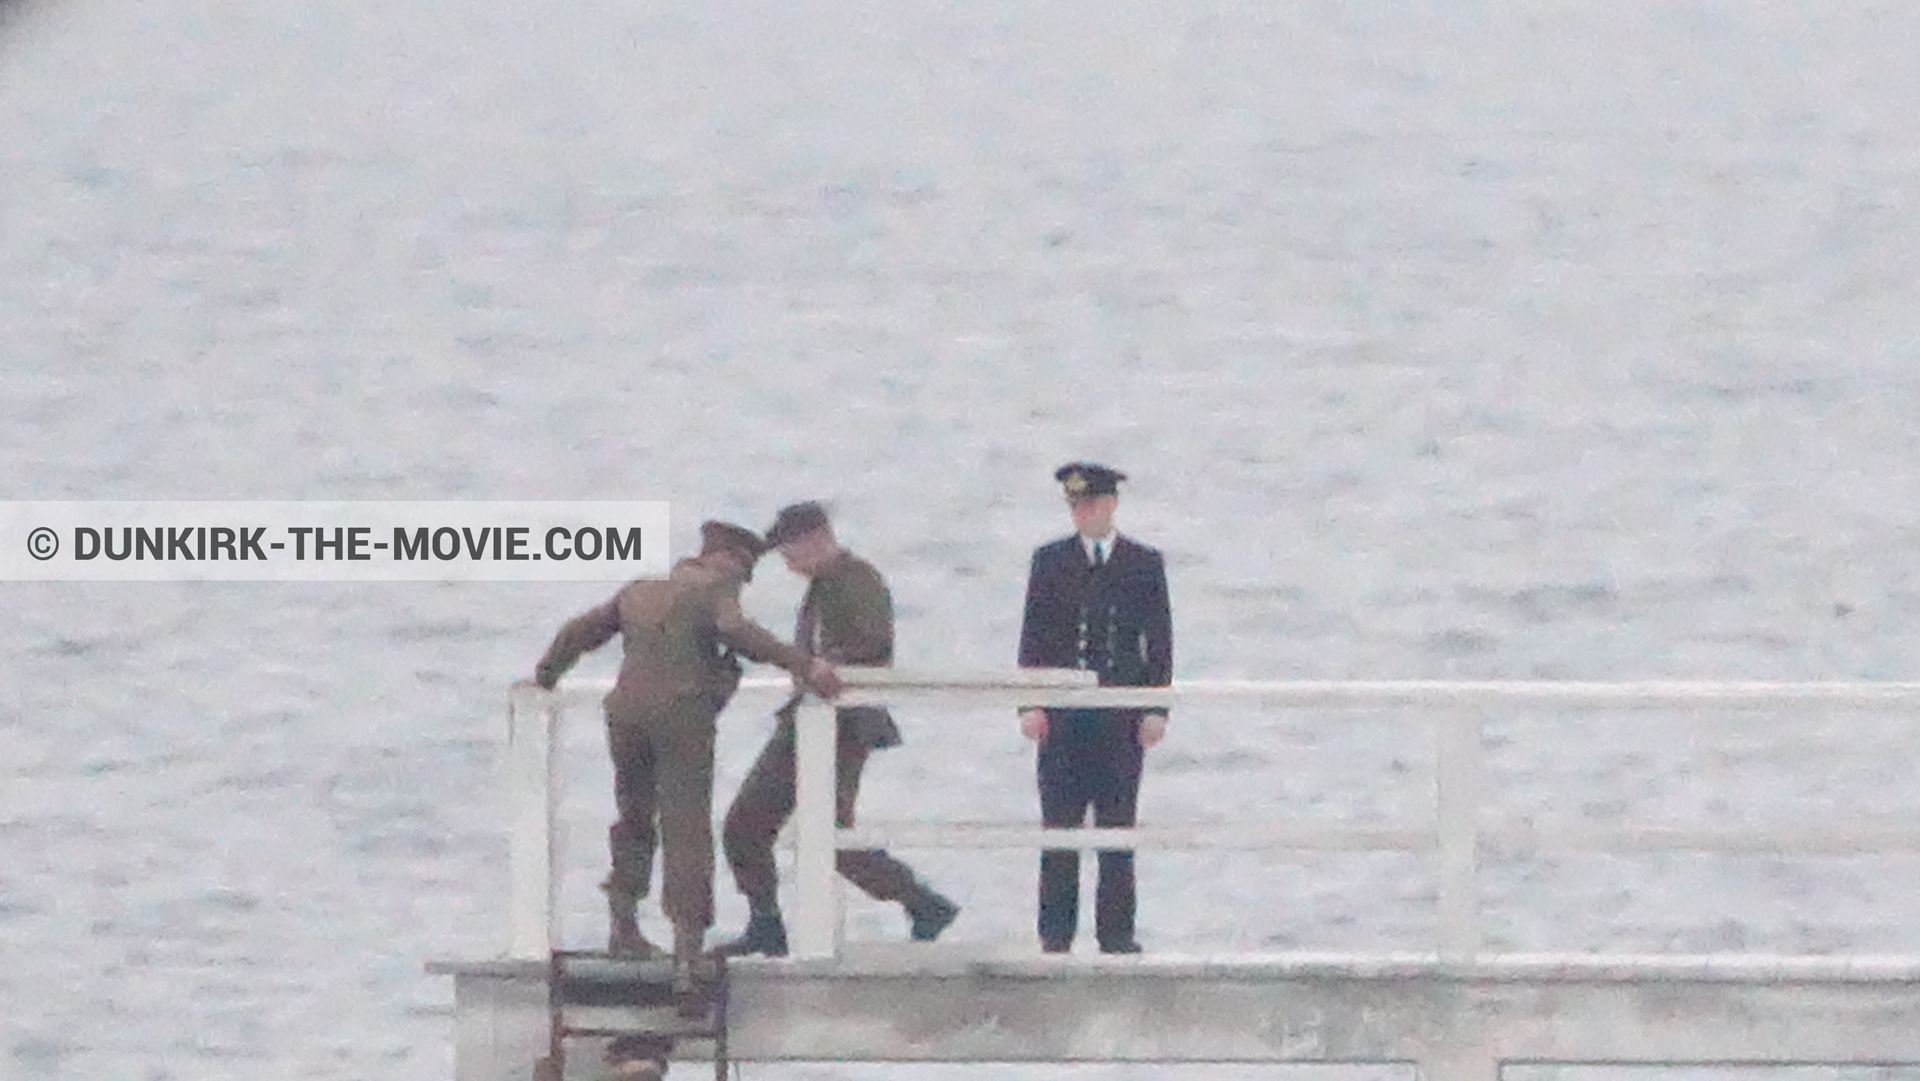 Picture with actor, EST pier,  from behind the scene of the Dunkirk movie by Nolan